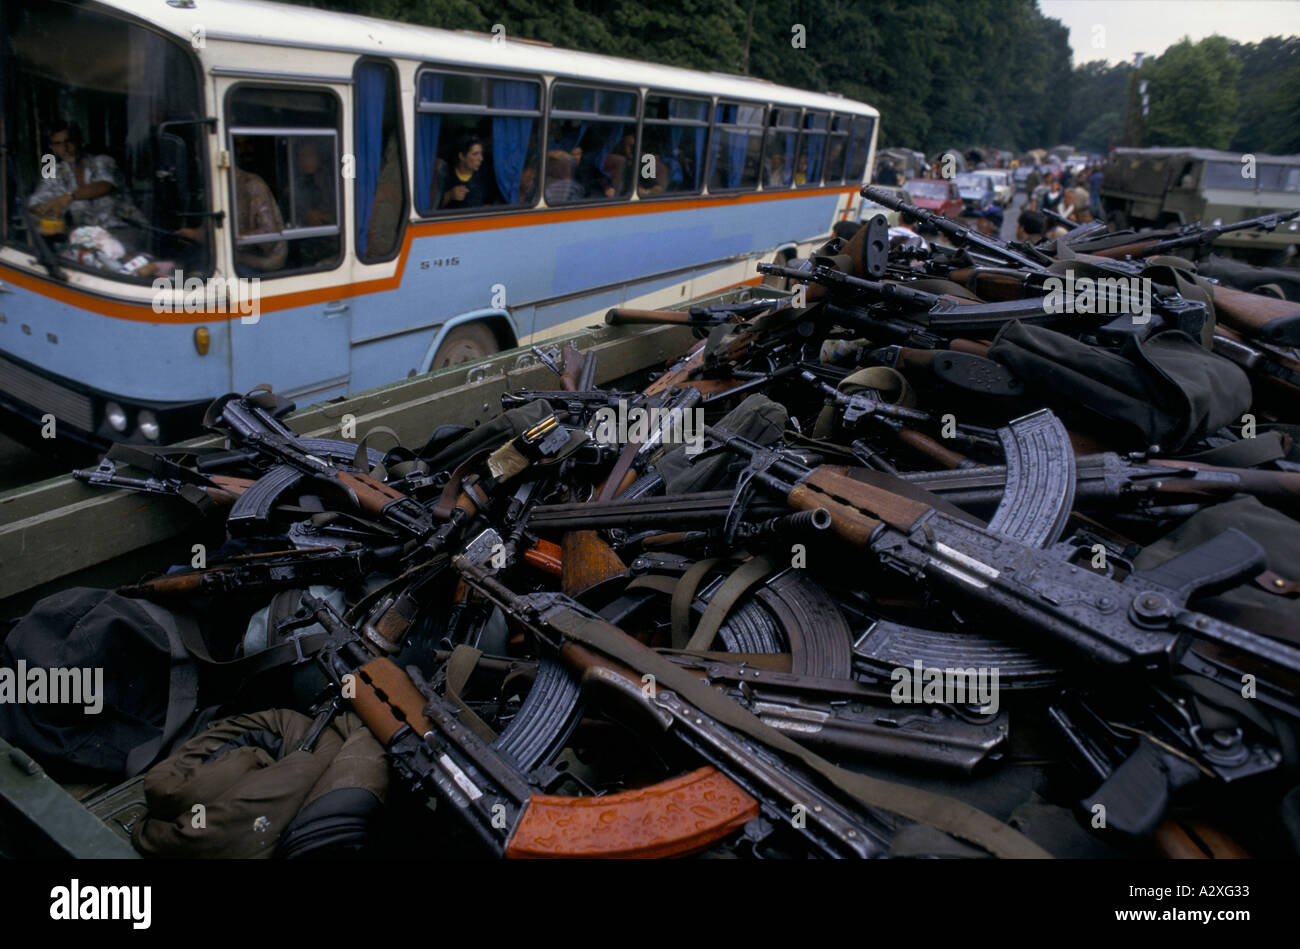 Croatian re-capture of Krajina, Aug 95: A bus of Serb refugees passes a truck full of AK 47s surrendered by Krajina Serbs. Stock Photo